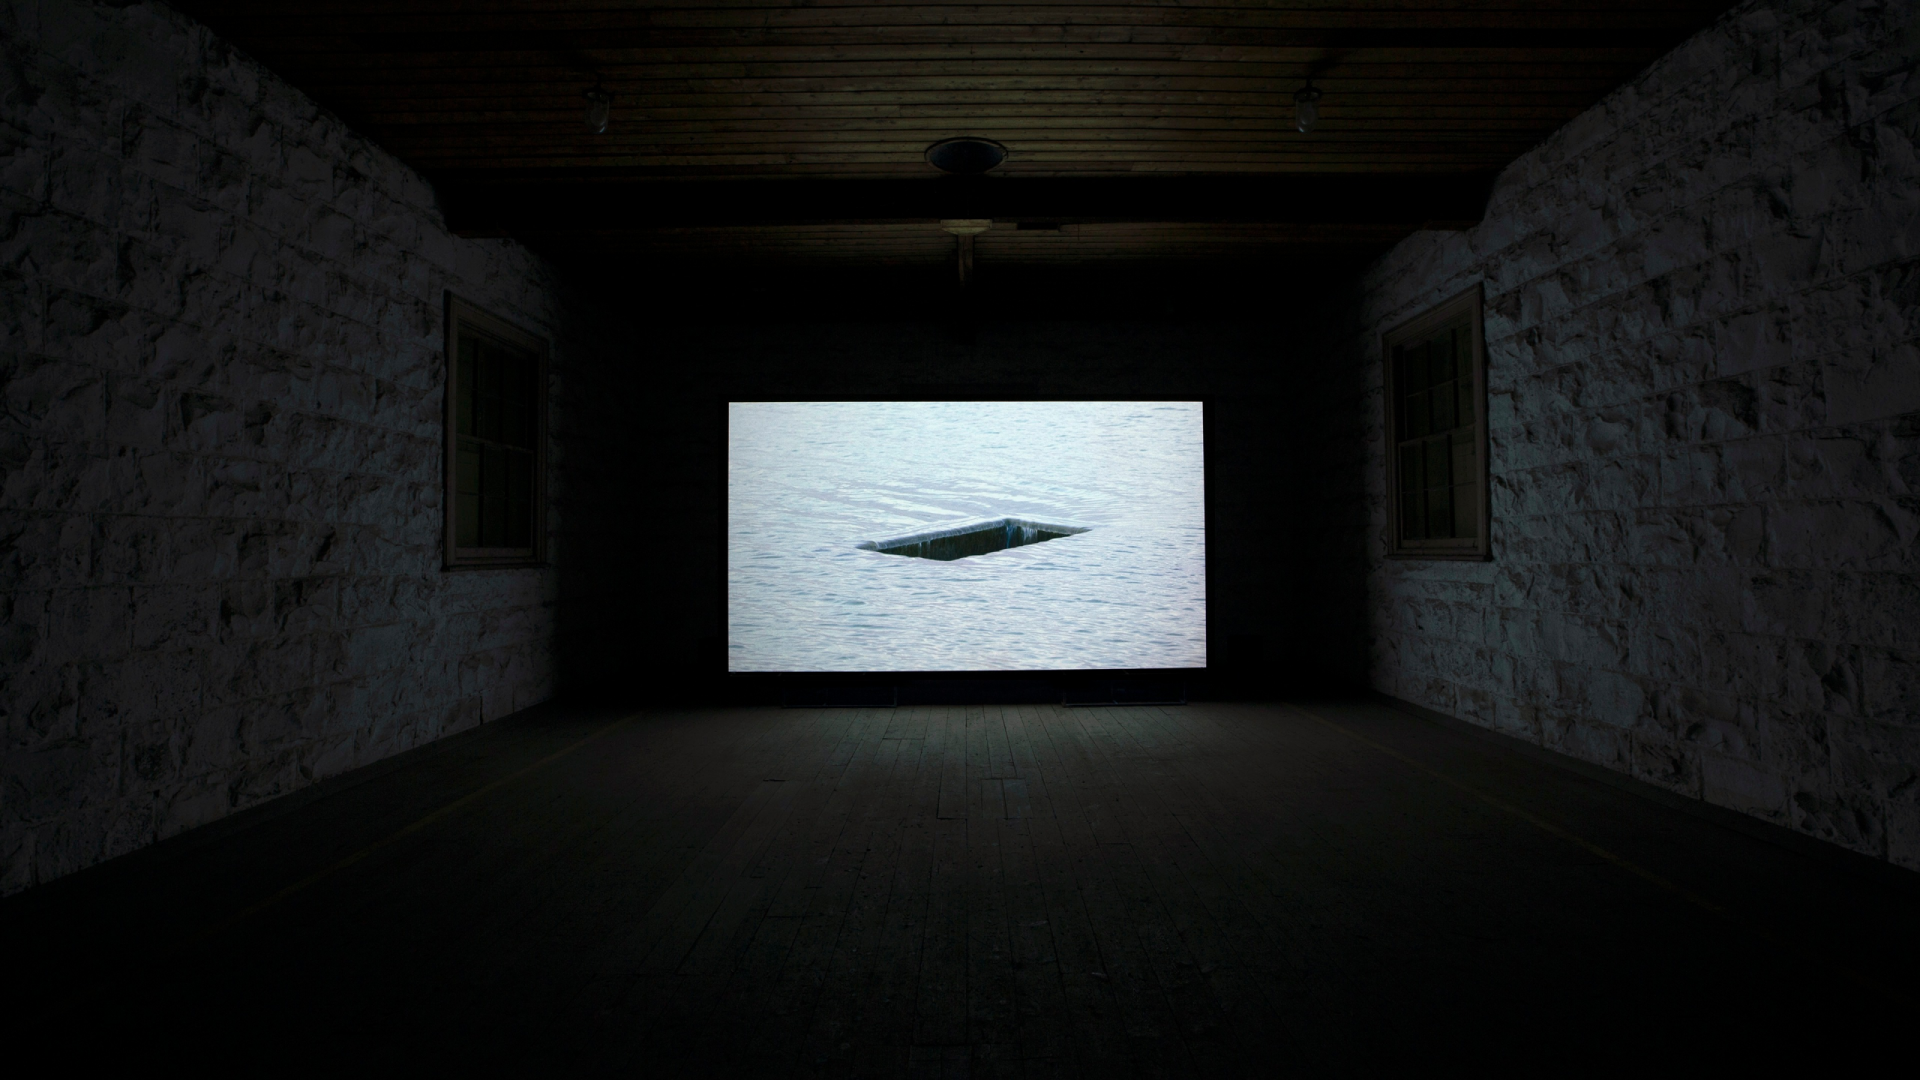 Dark room illuminated by large film screen depicting water drainage